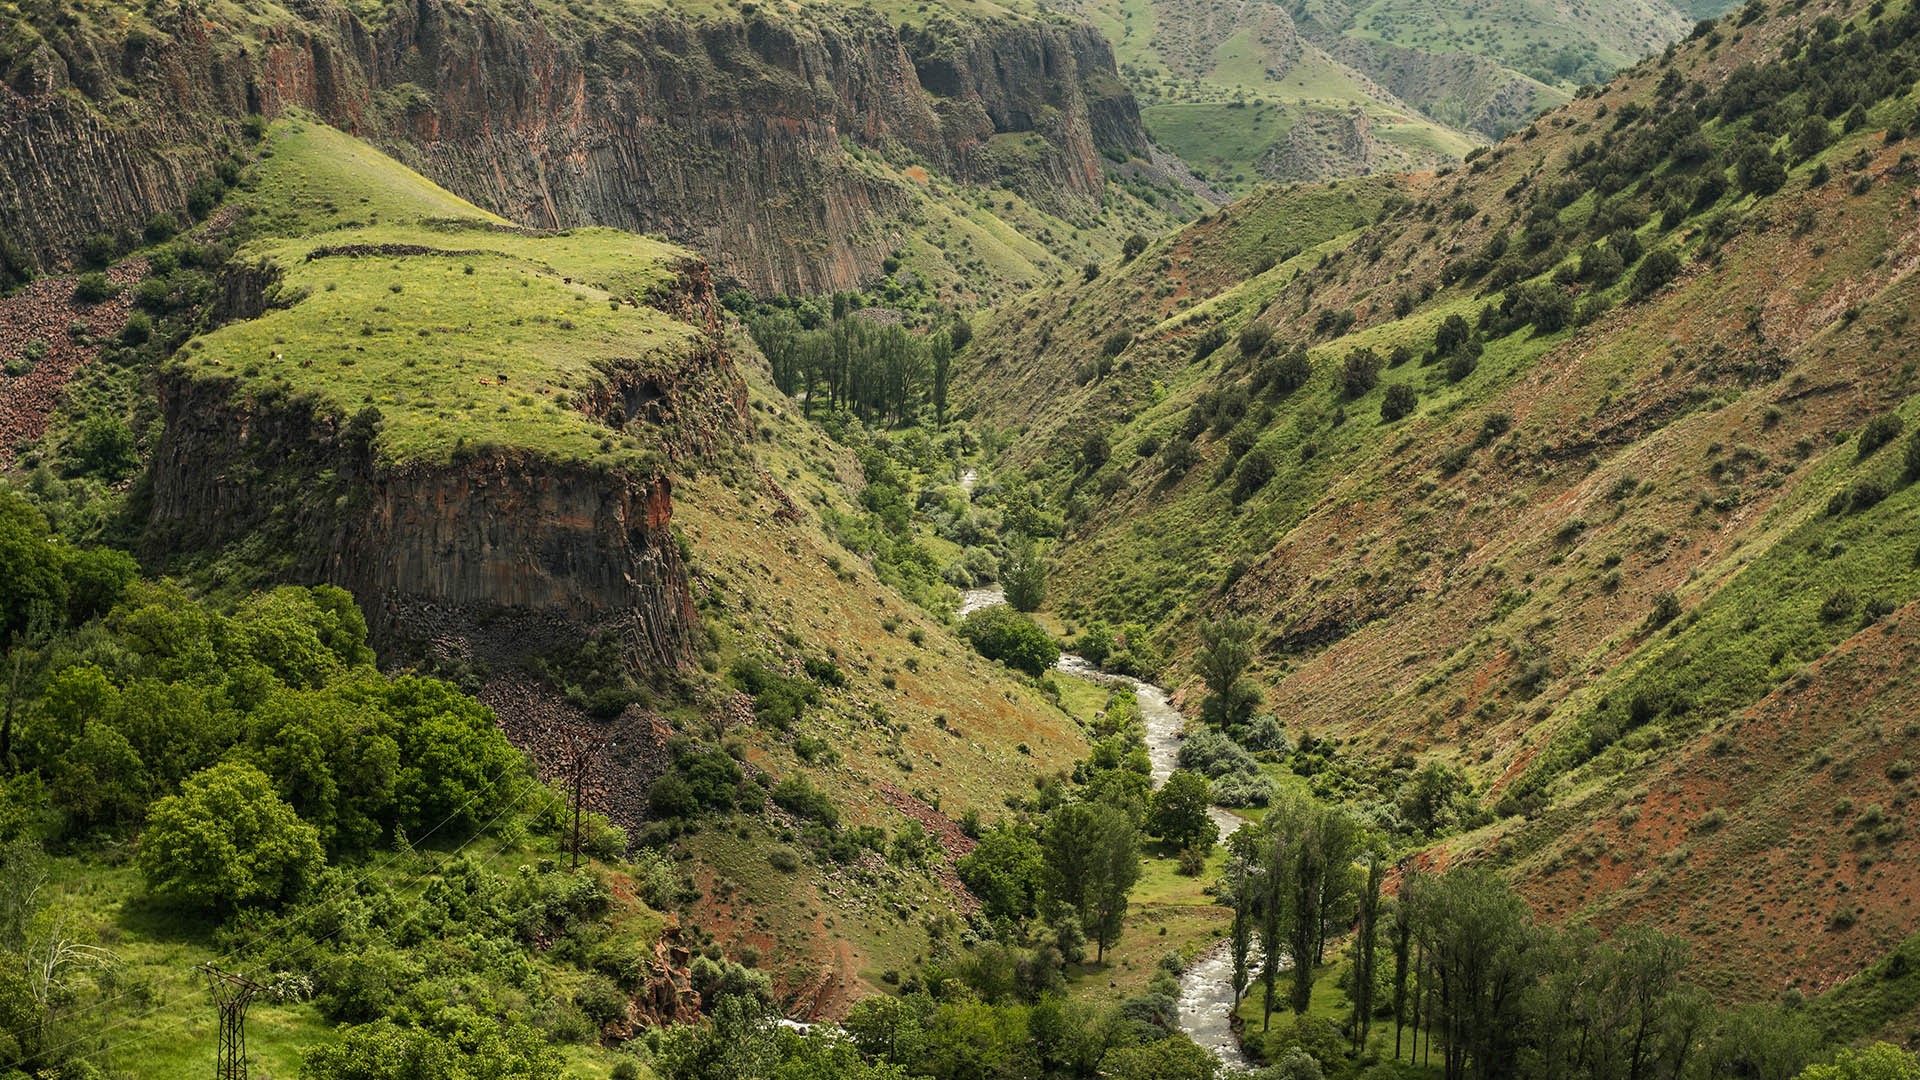 General 1920x1080 nature landscape valley trees plants forest river gorge Armenia mountains